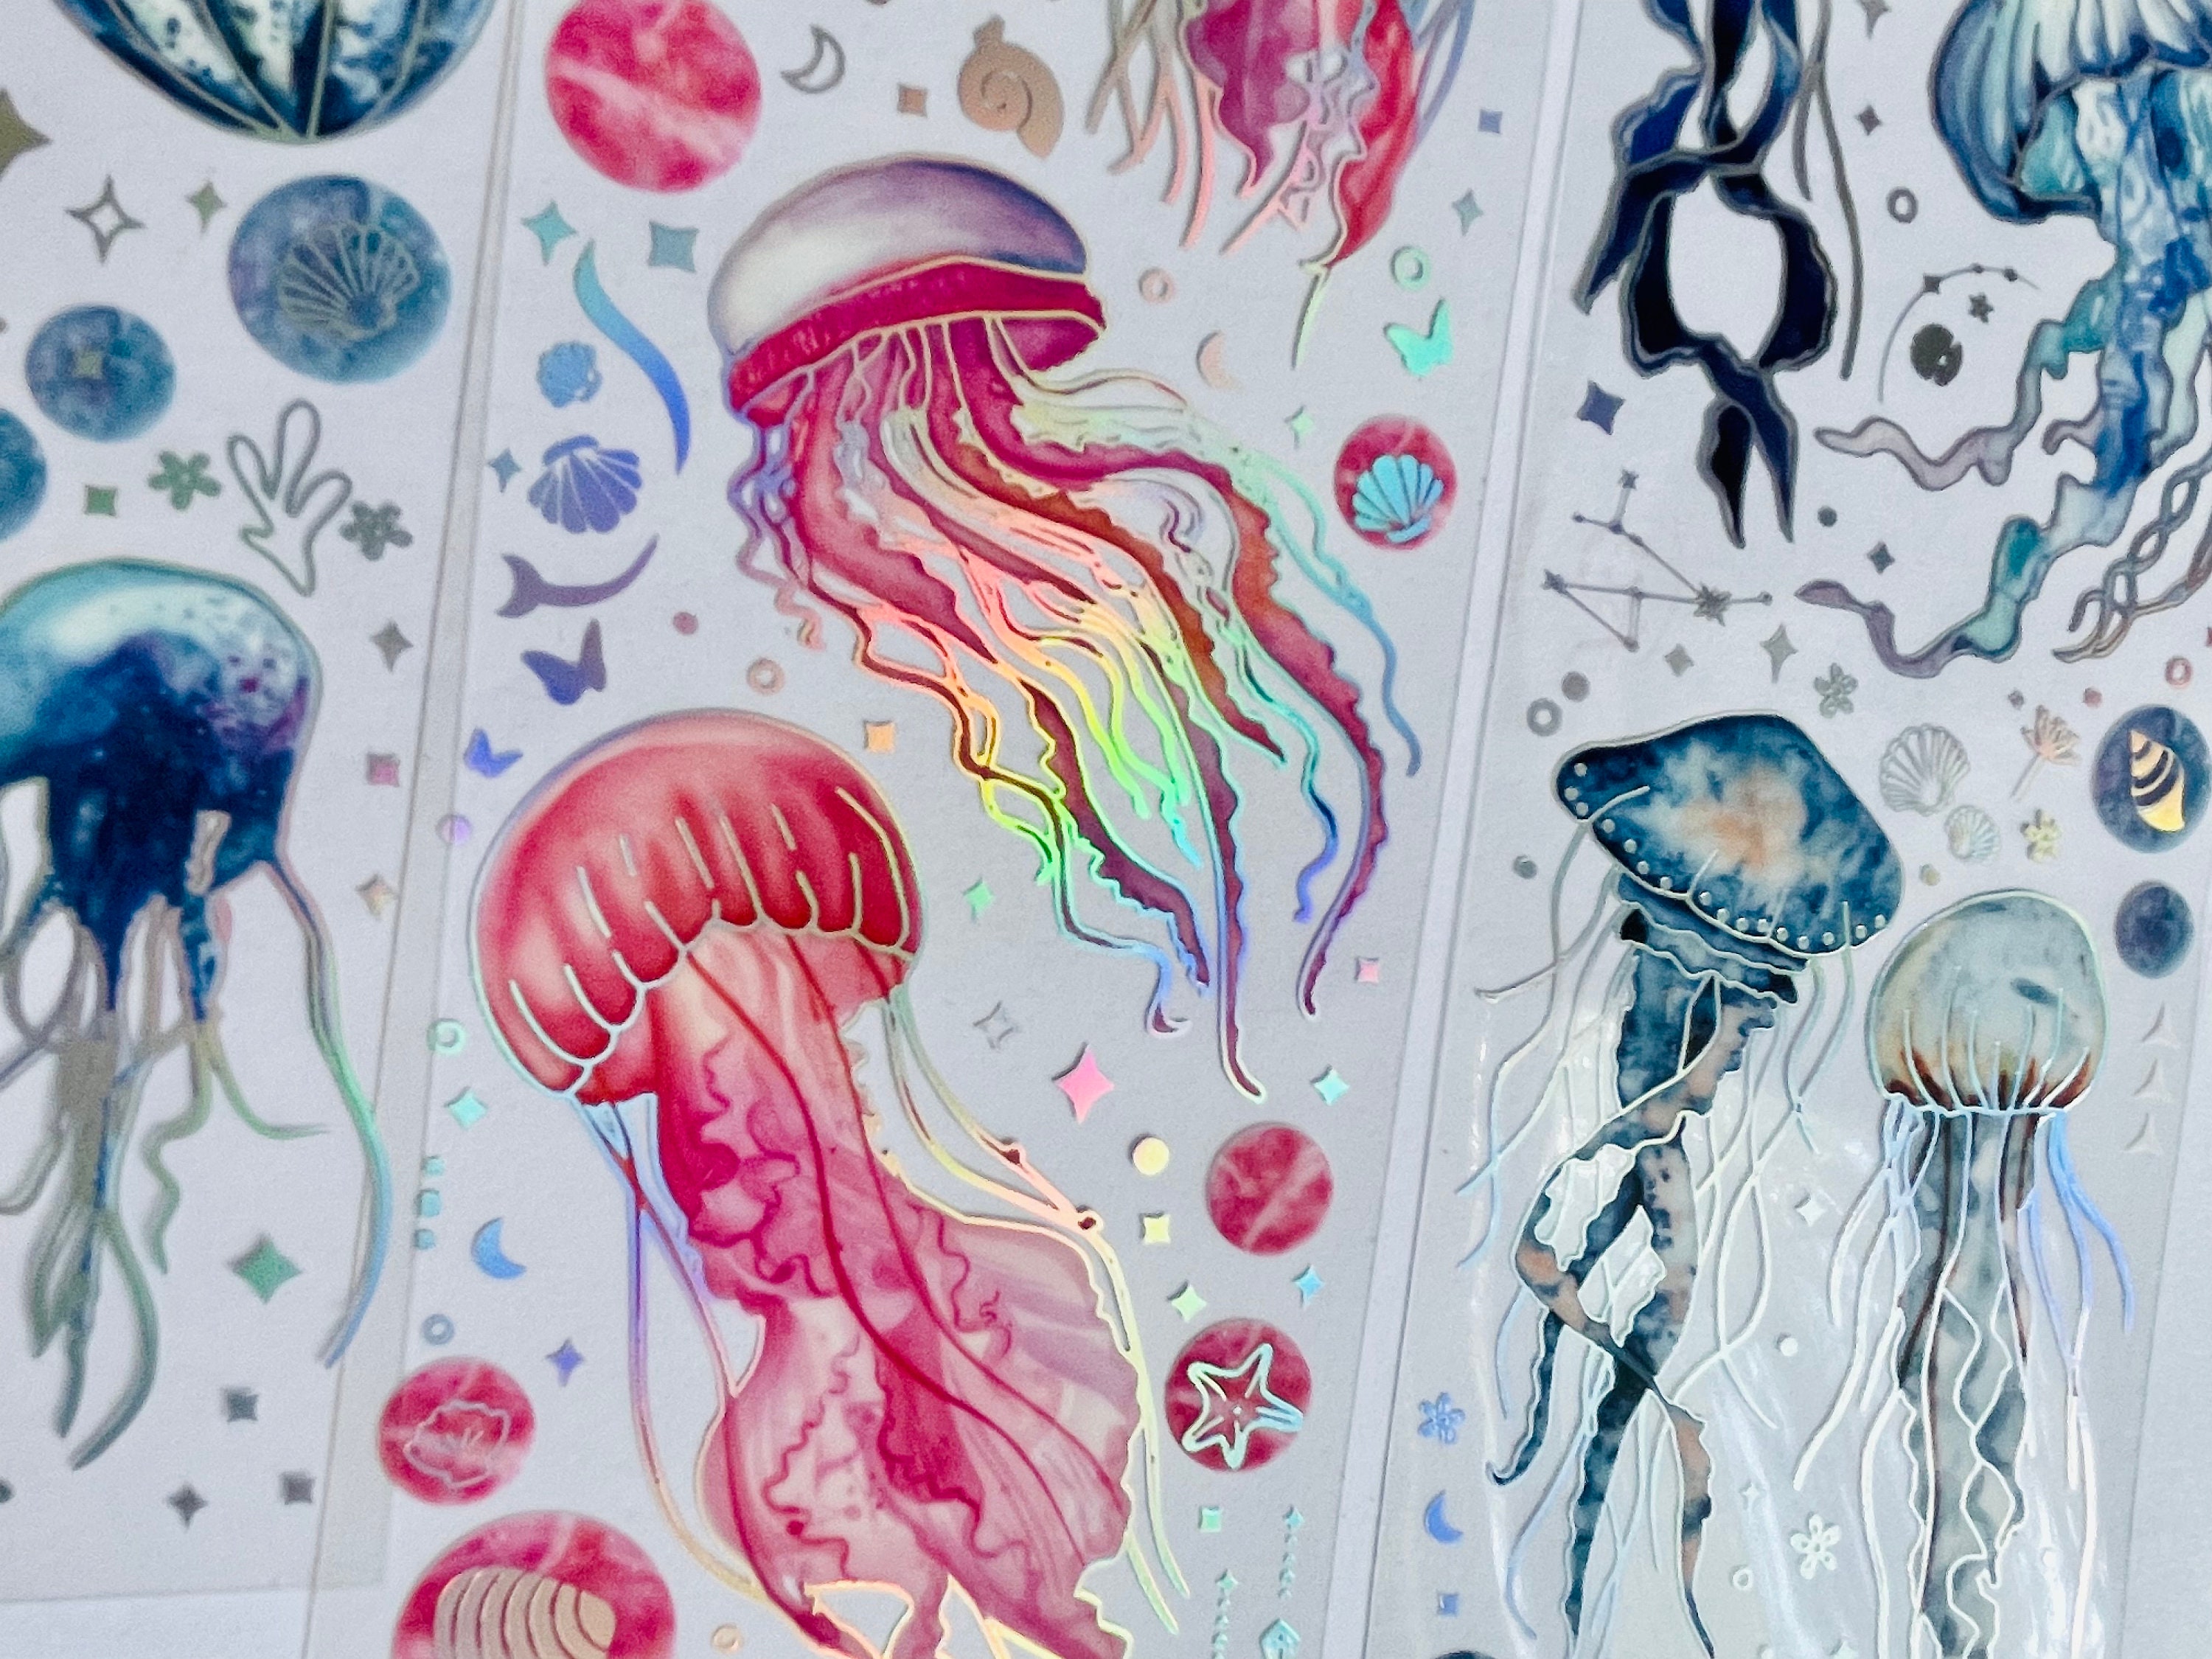 Jellyfish Holographic Stickers